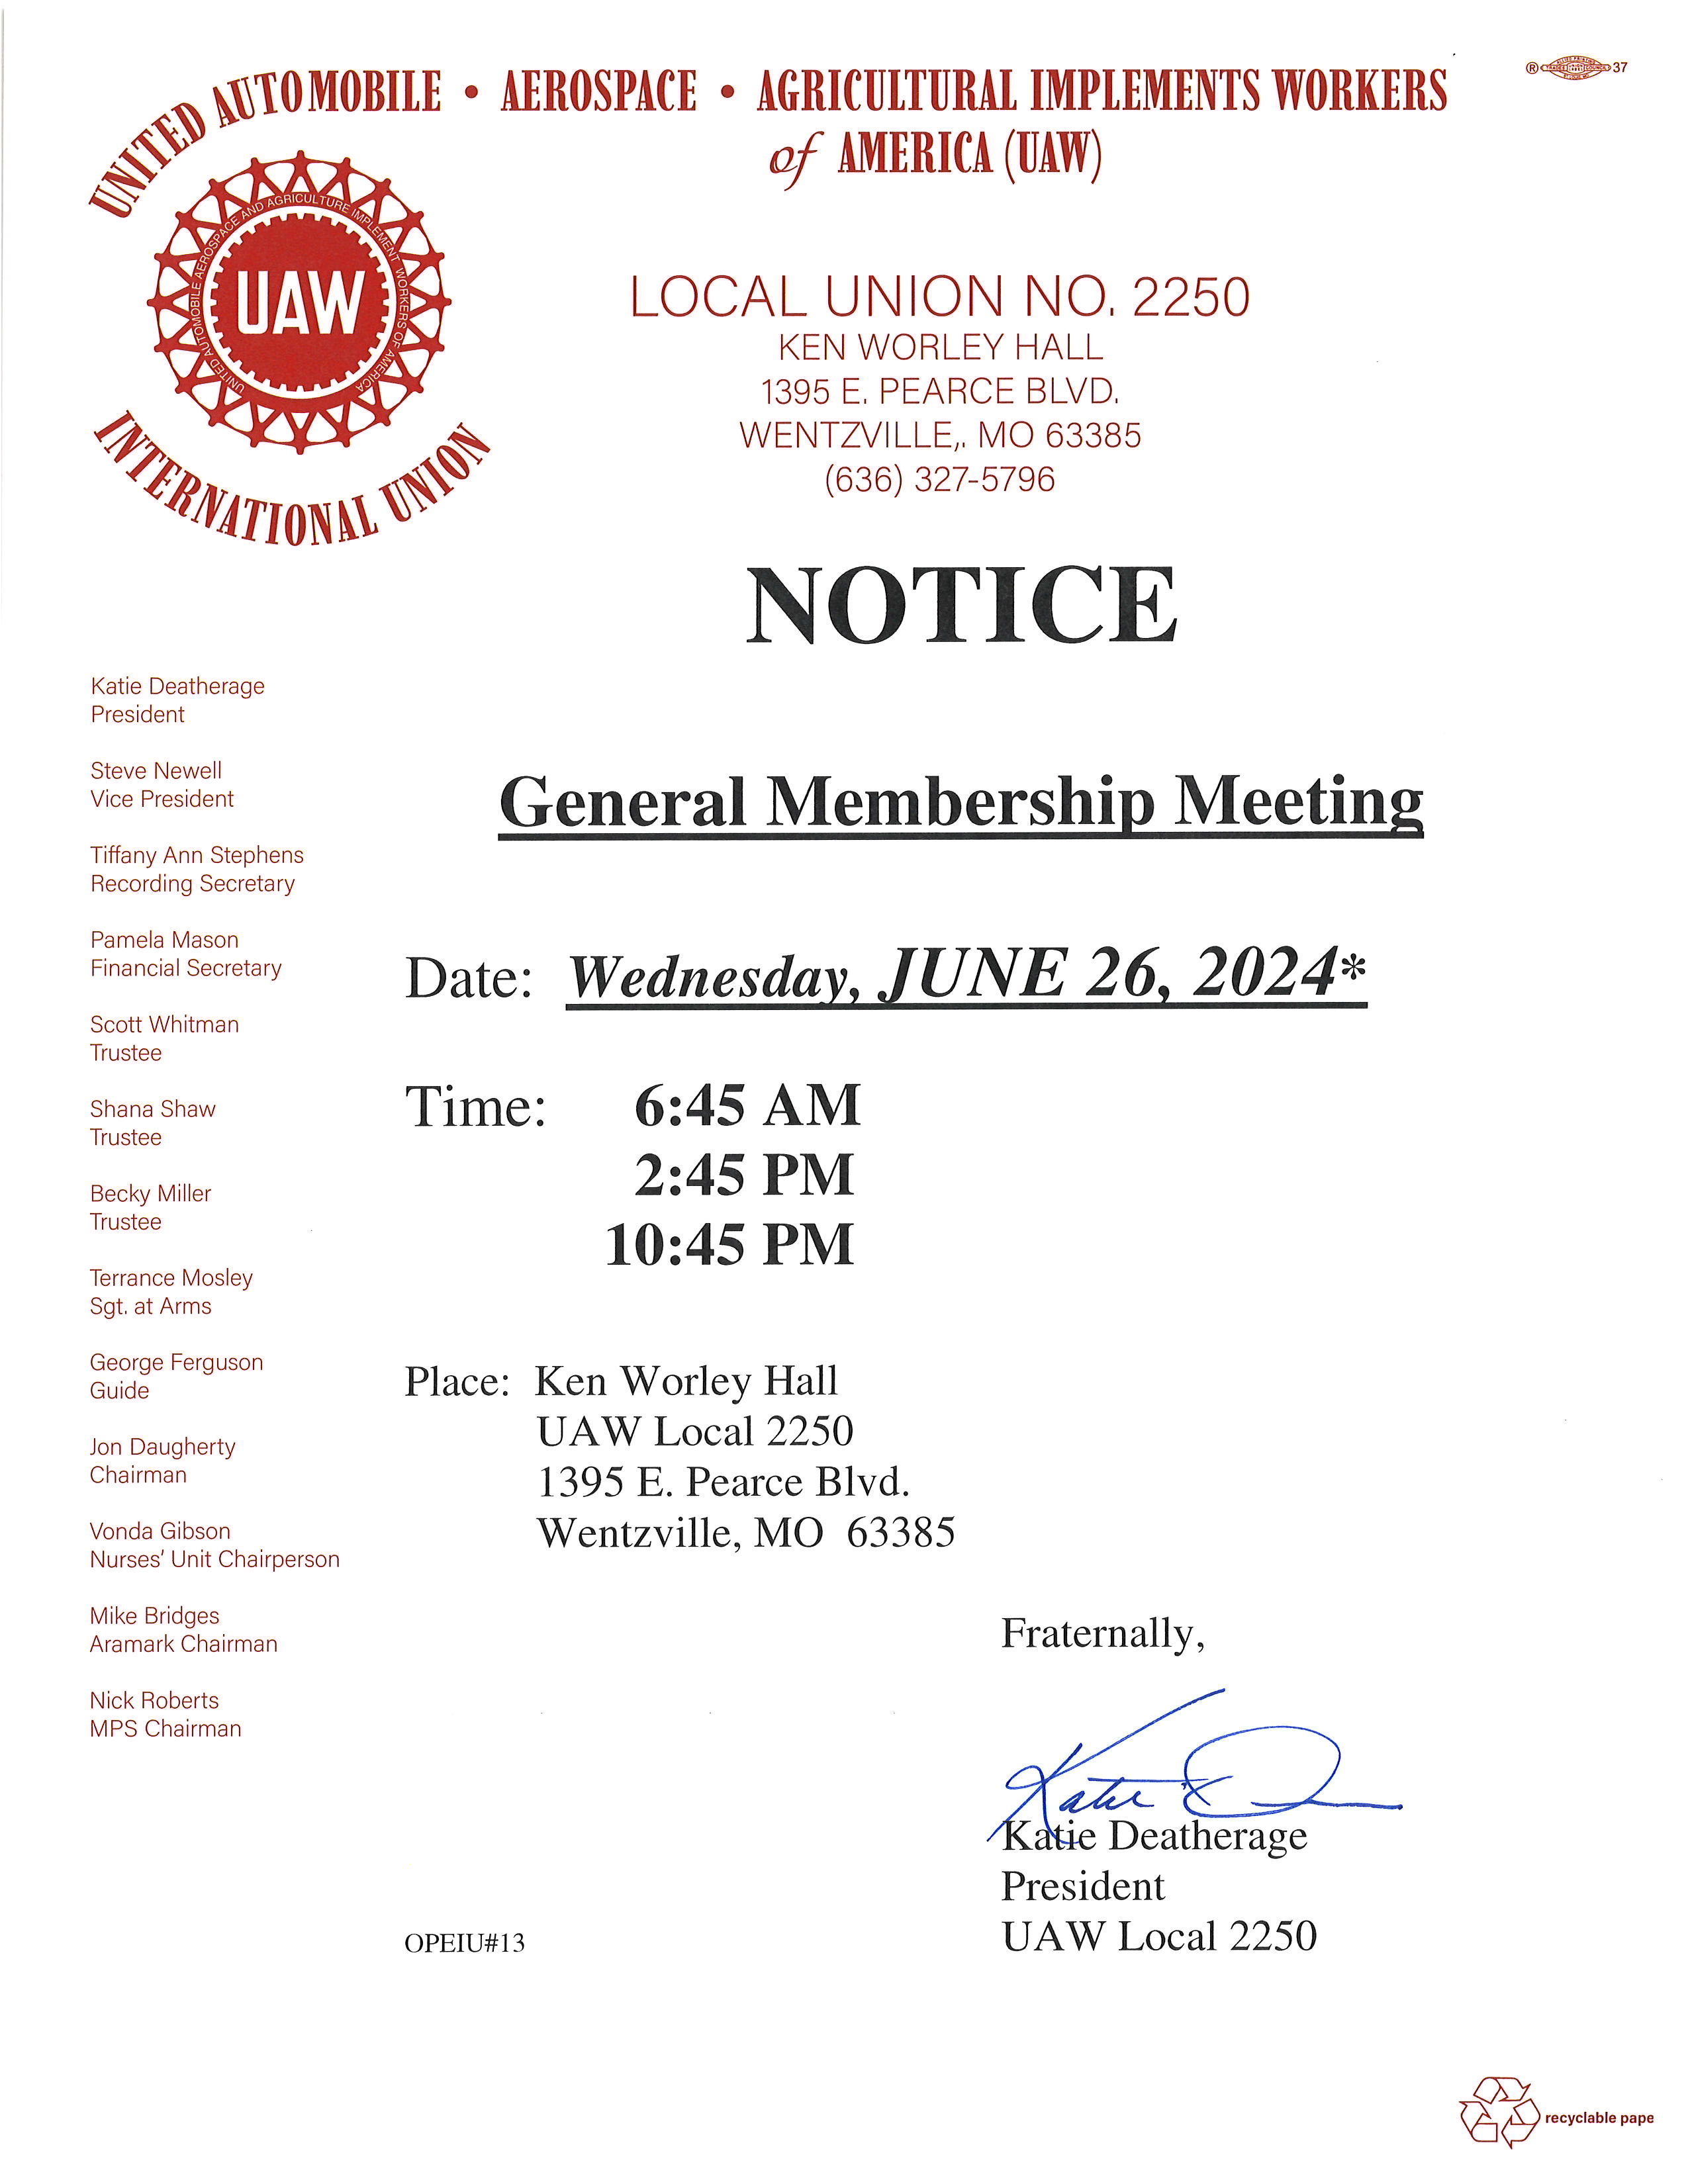 June Union Meeting On The 26th!